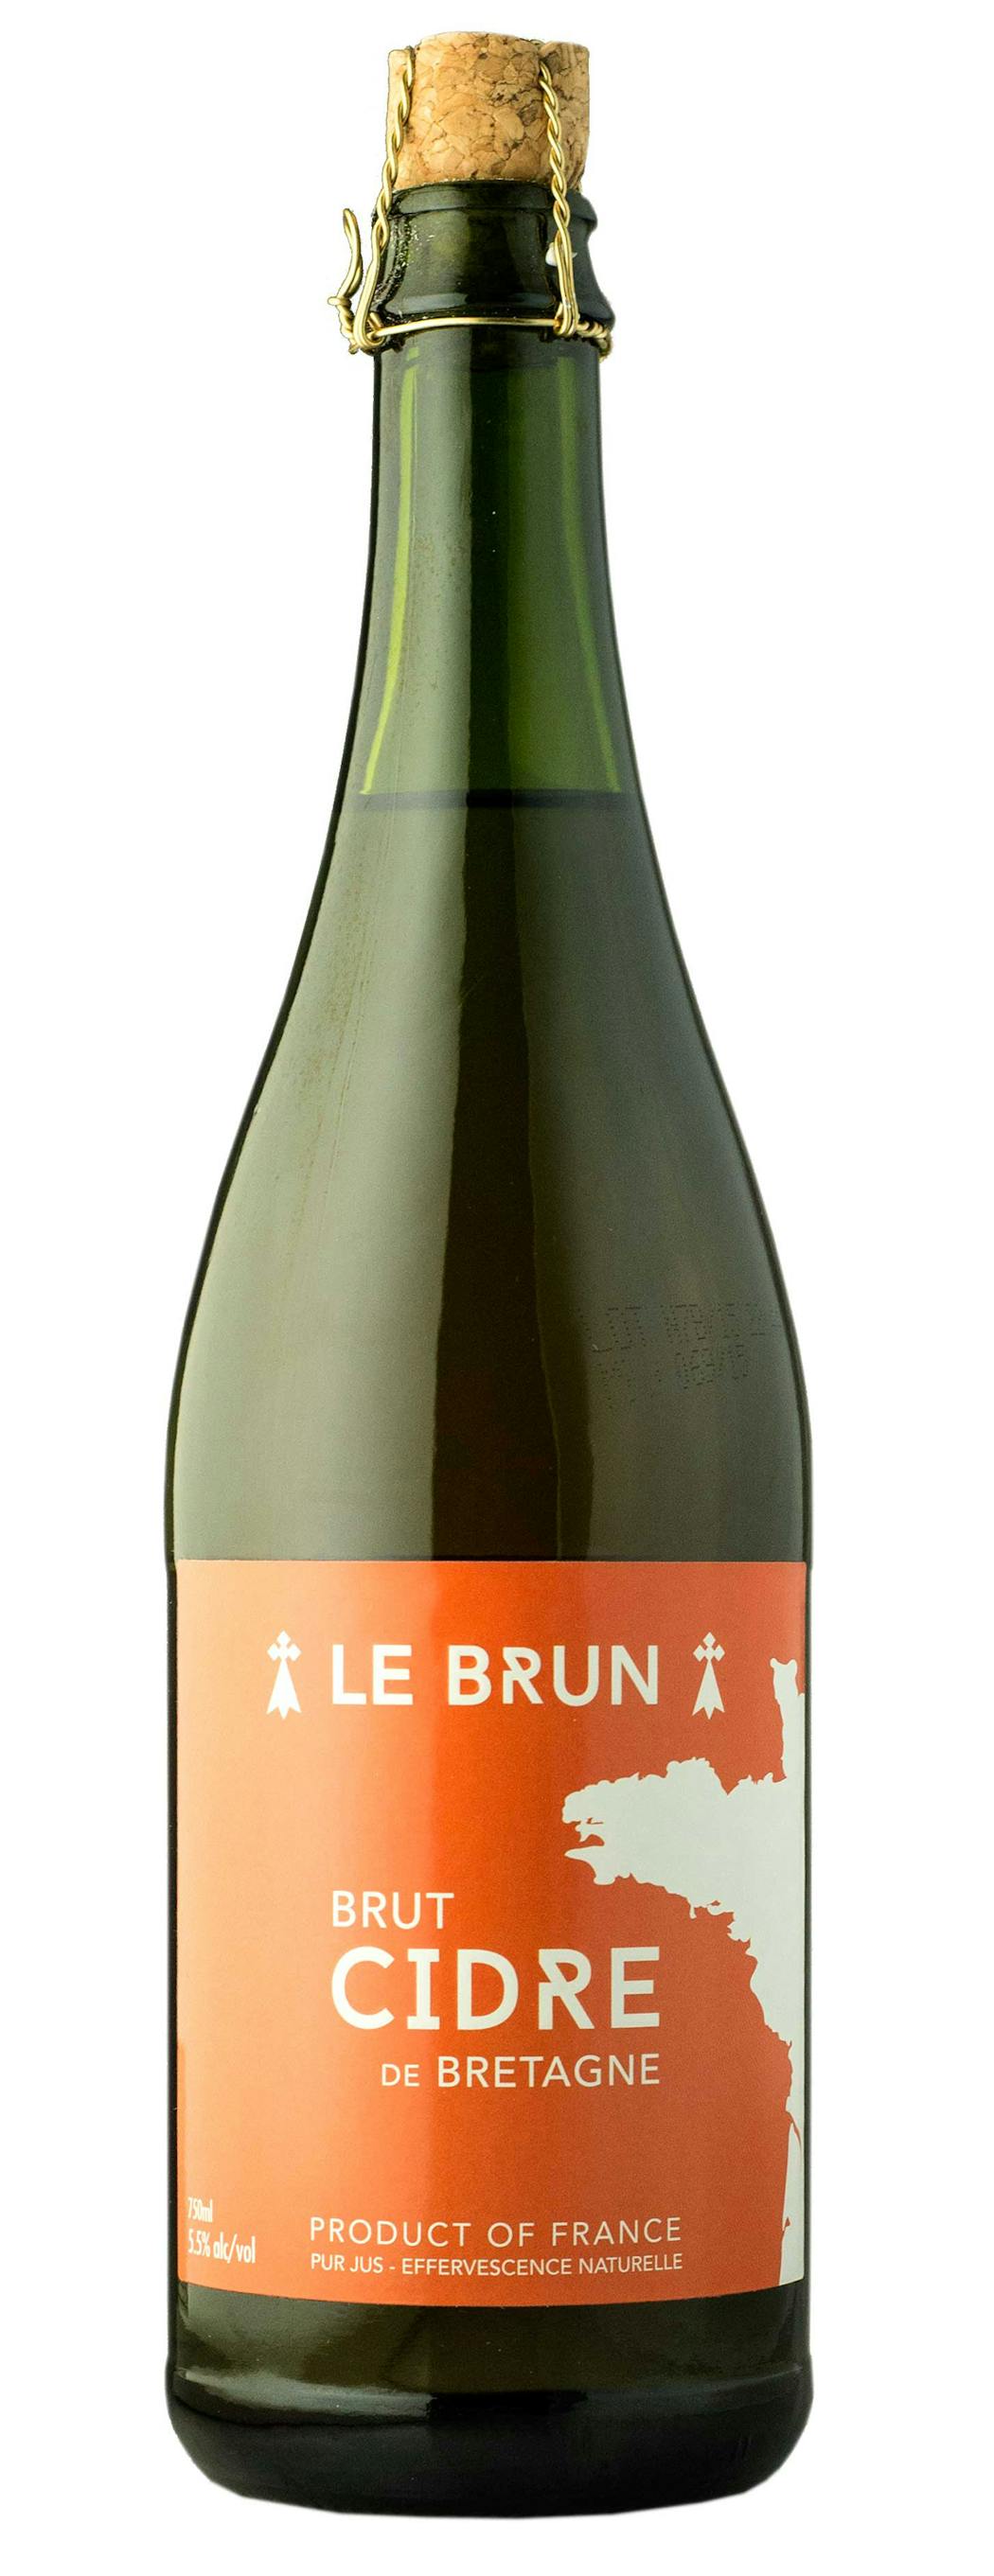 From Brittany, Le Brun’s Brut is a bright, refreshing treat.